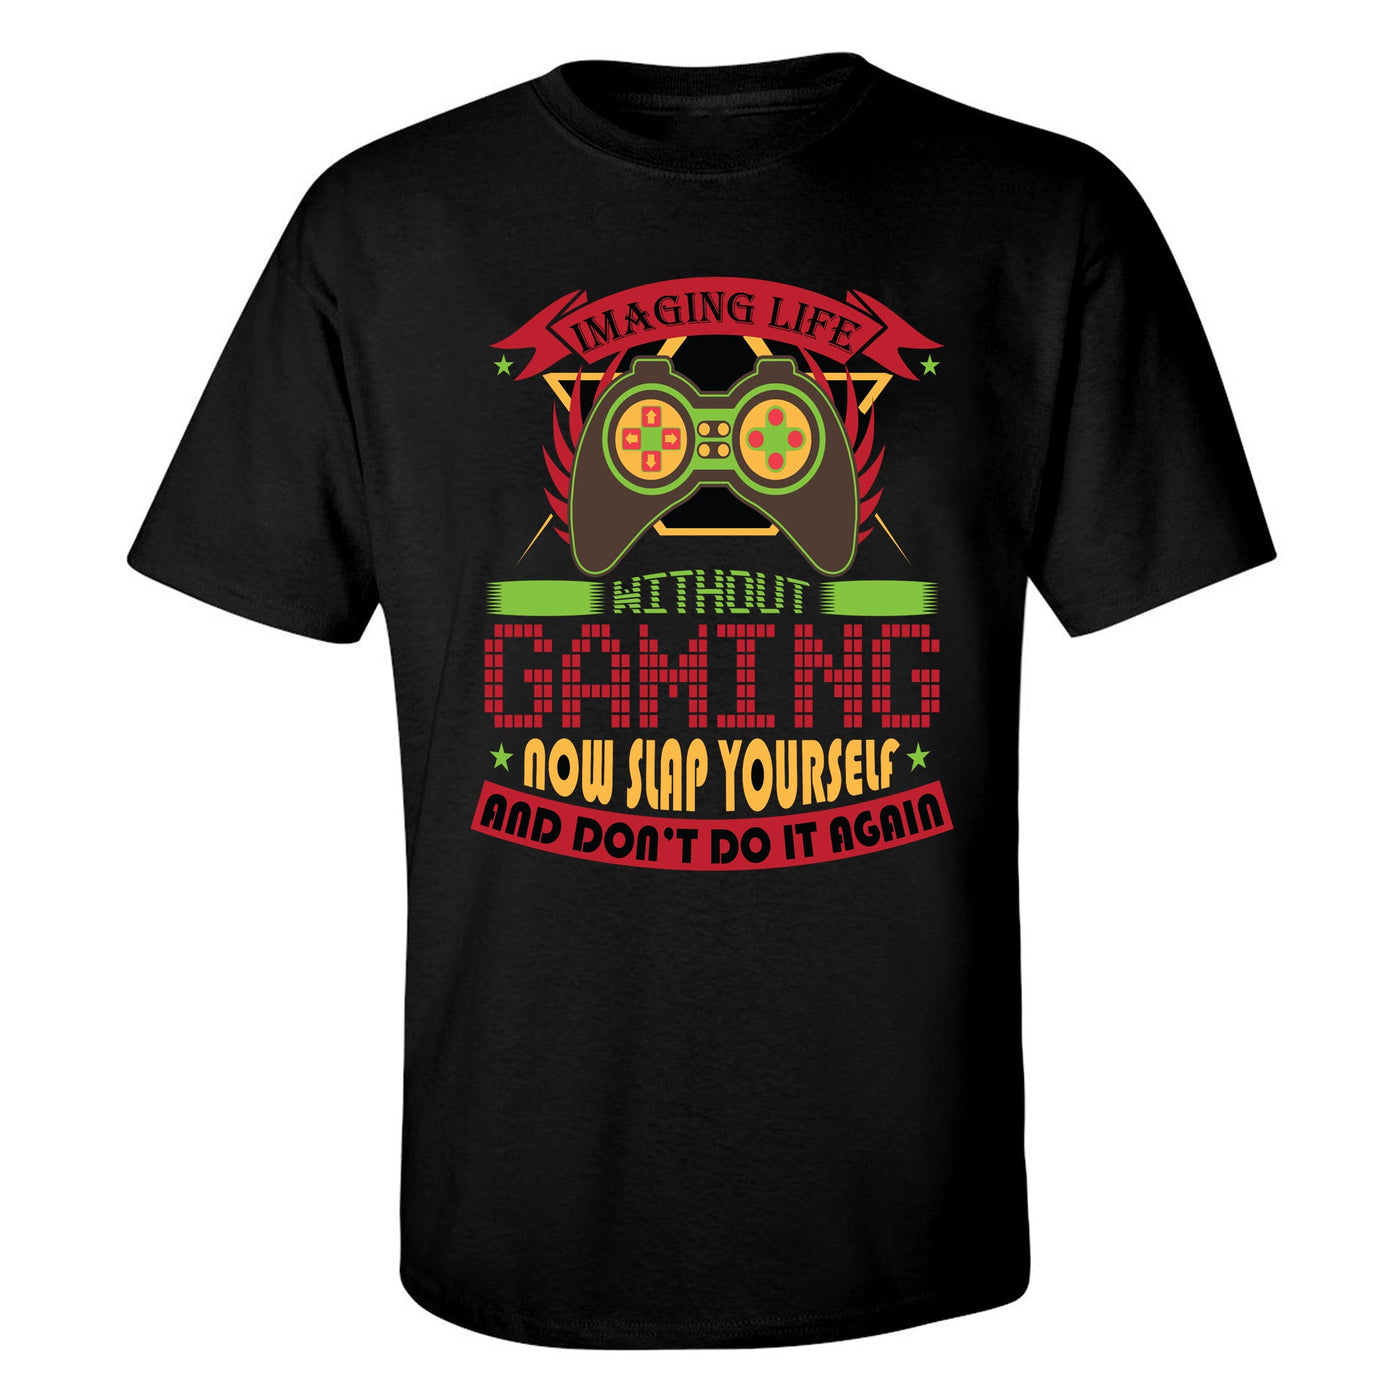 "Life Without Gaming" Short Sleeve T-Shirt